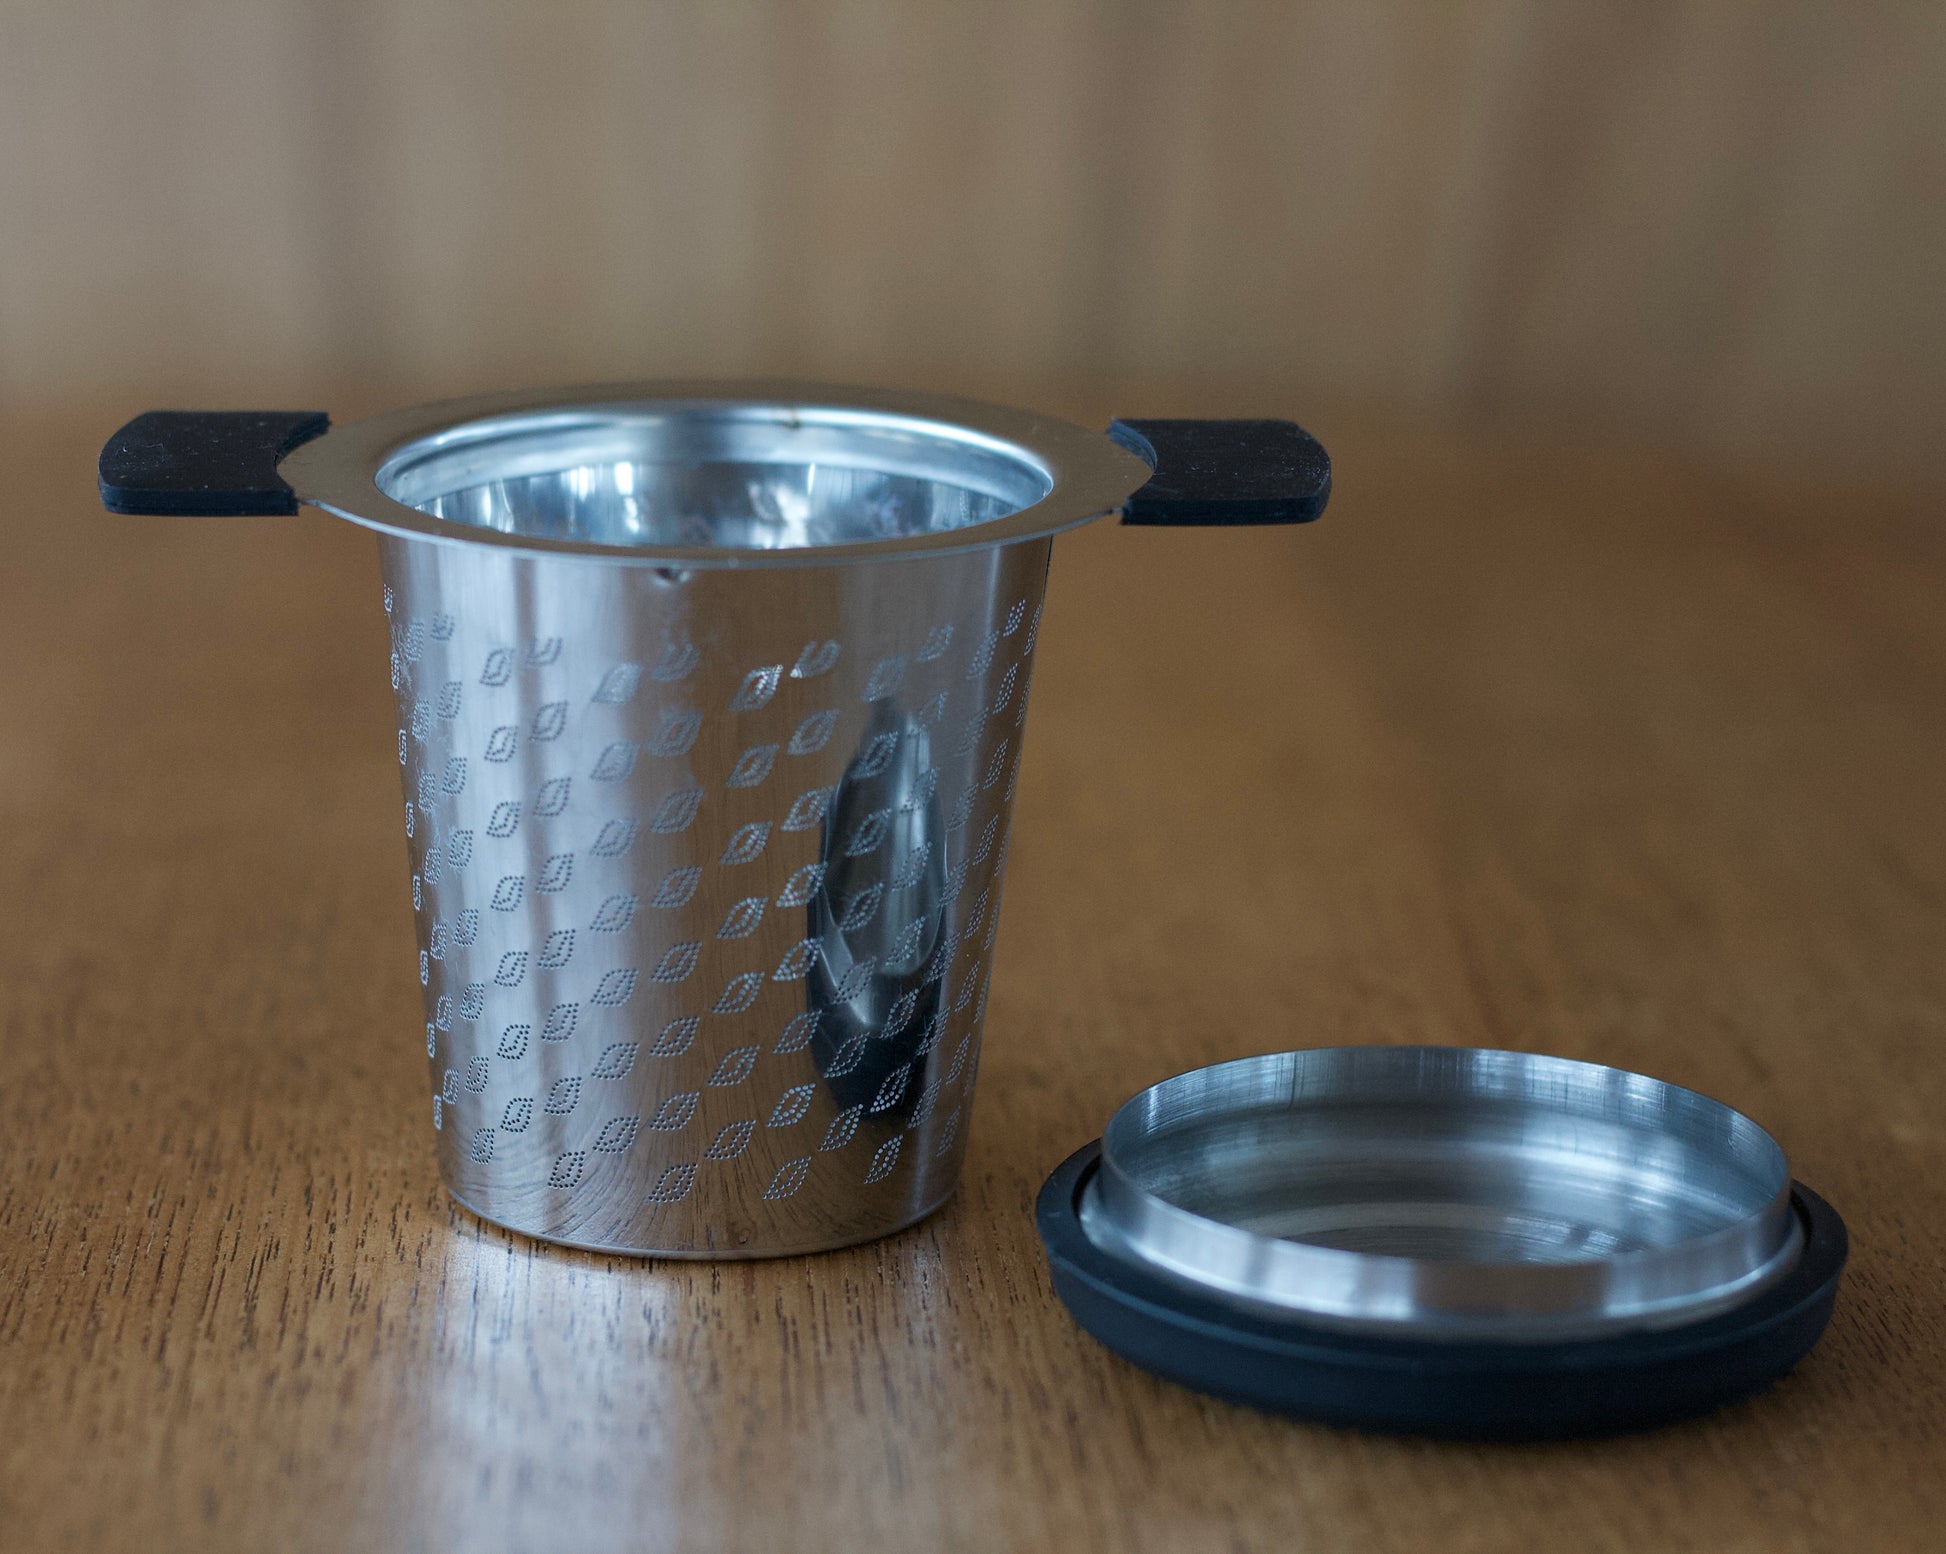 Teaology Micro-mesh Infuser